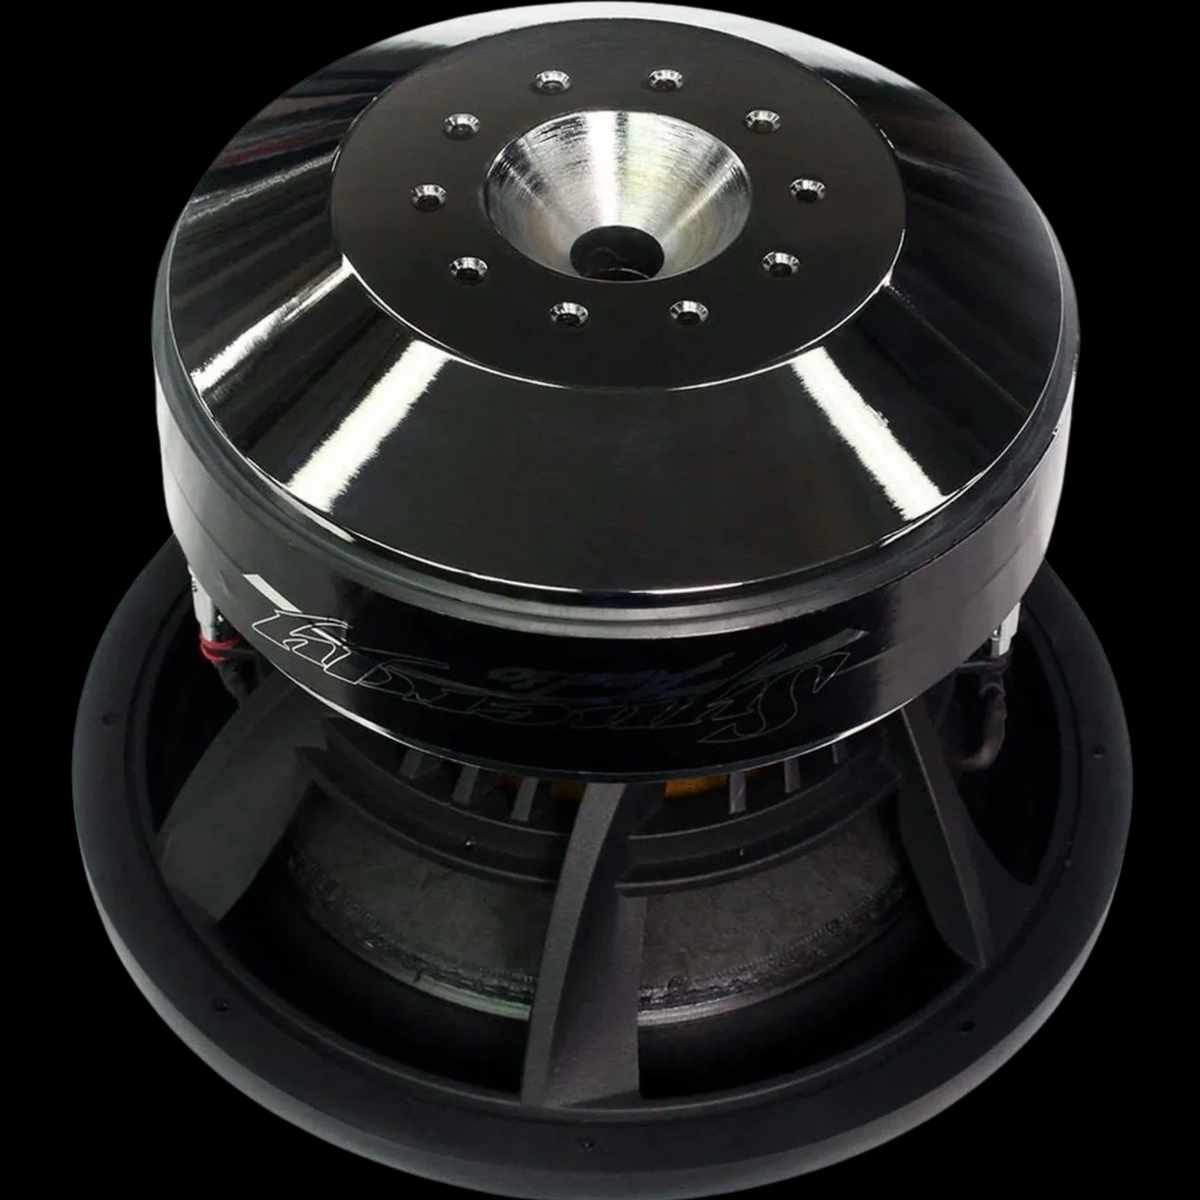 SYNERGY AUDIO WFO 12" COMPETITION SUBWOOFER